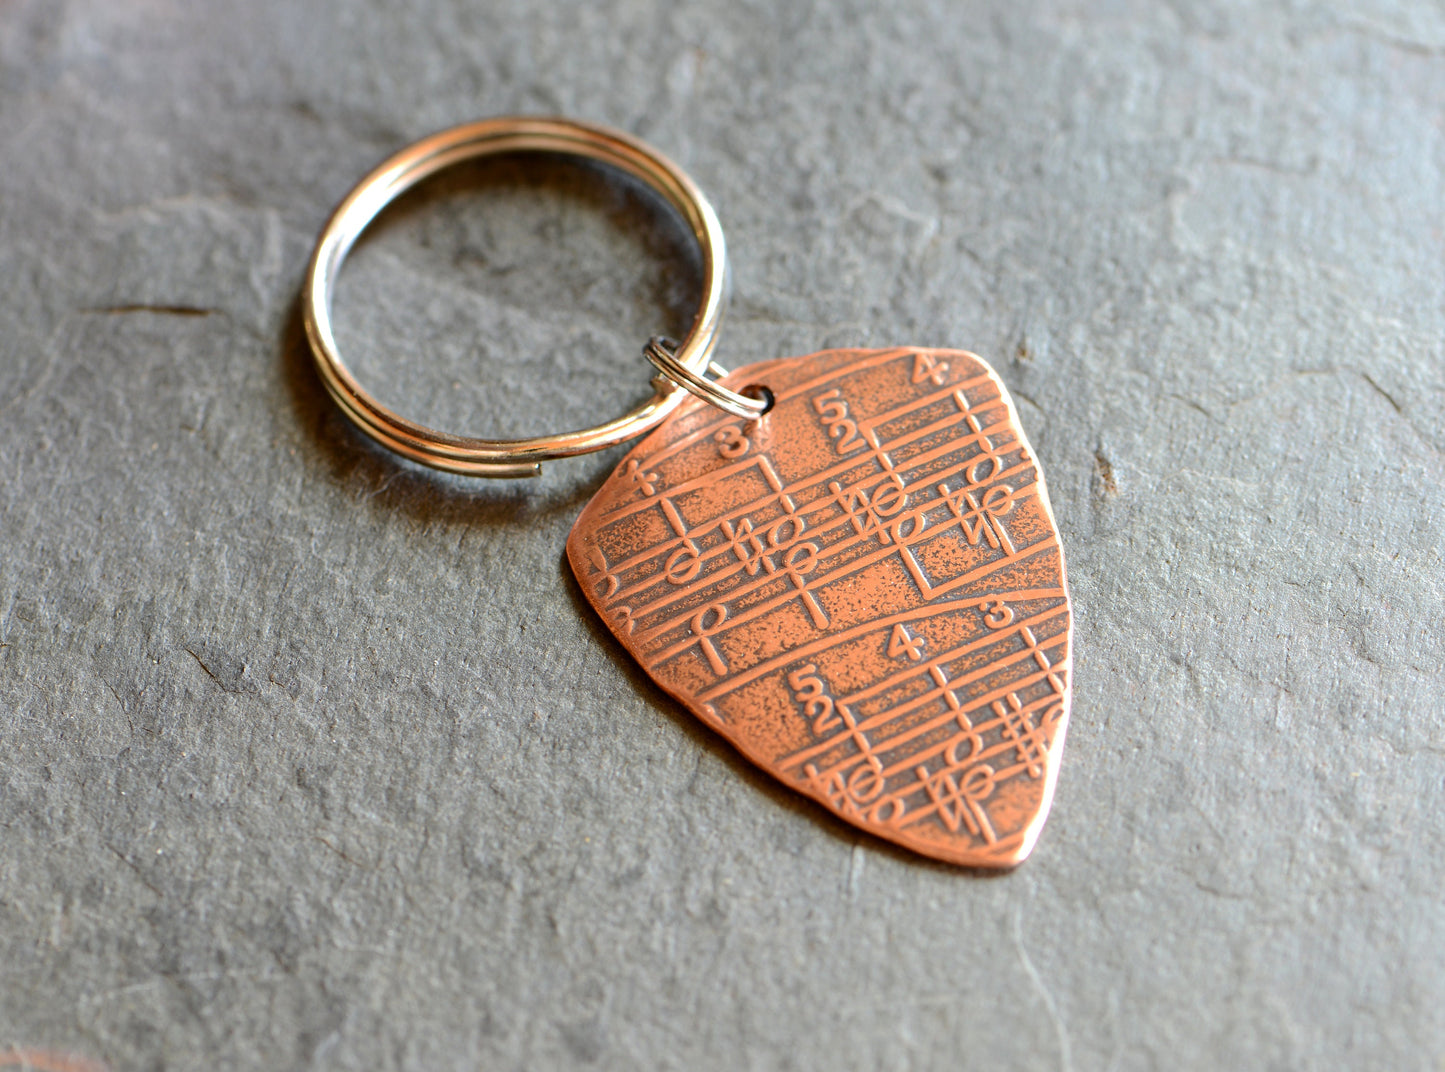 Copper key ring guitar pick with music notes